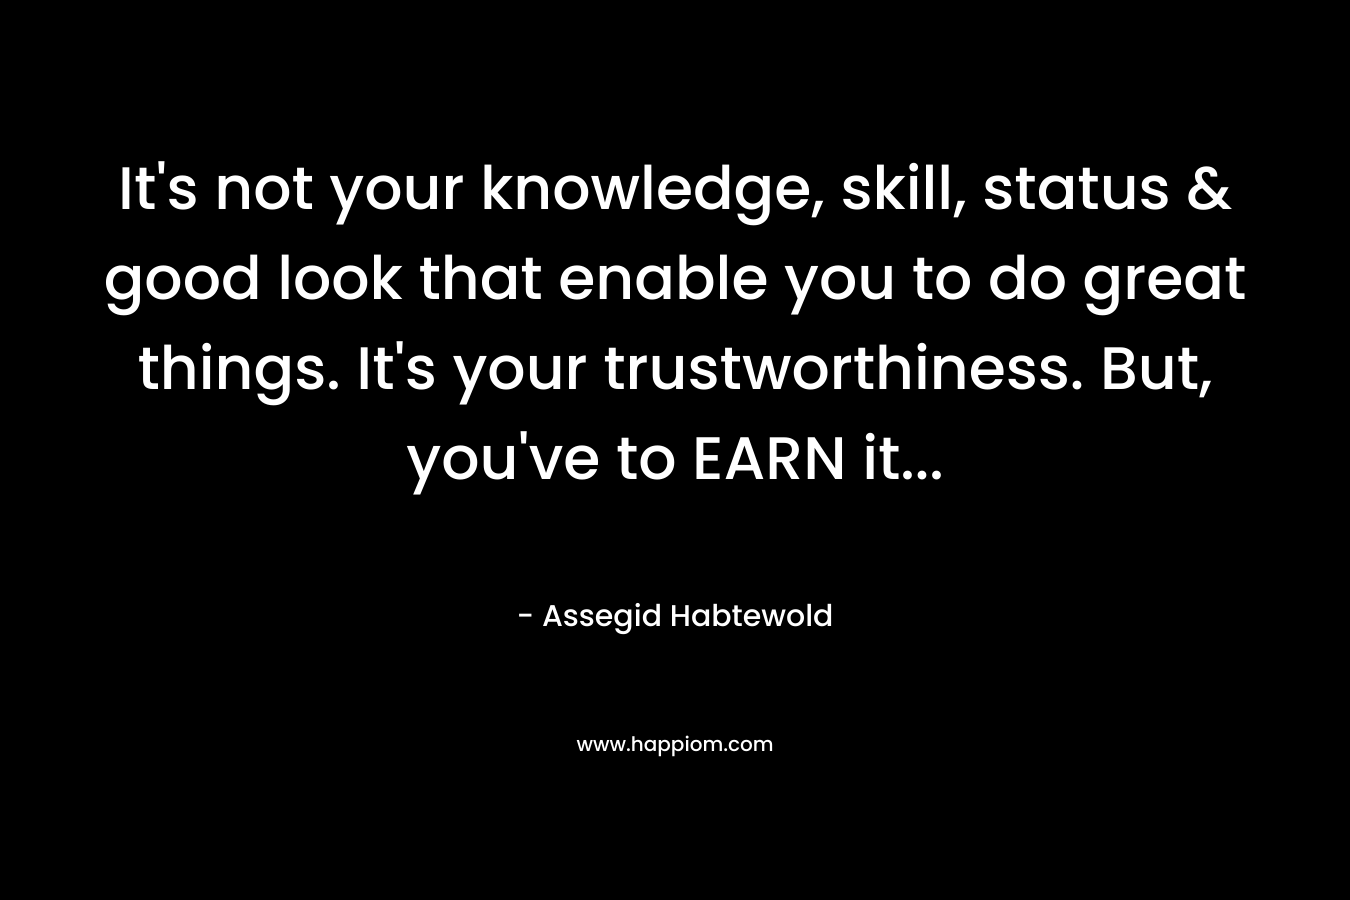 It's not your knowledge, skill, status & good look that enable you to do great things. It's your trustworthiness. But, you've to EARN it...